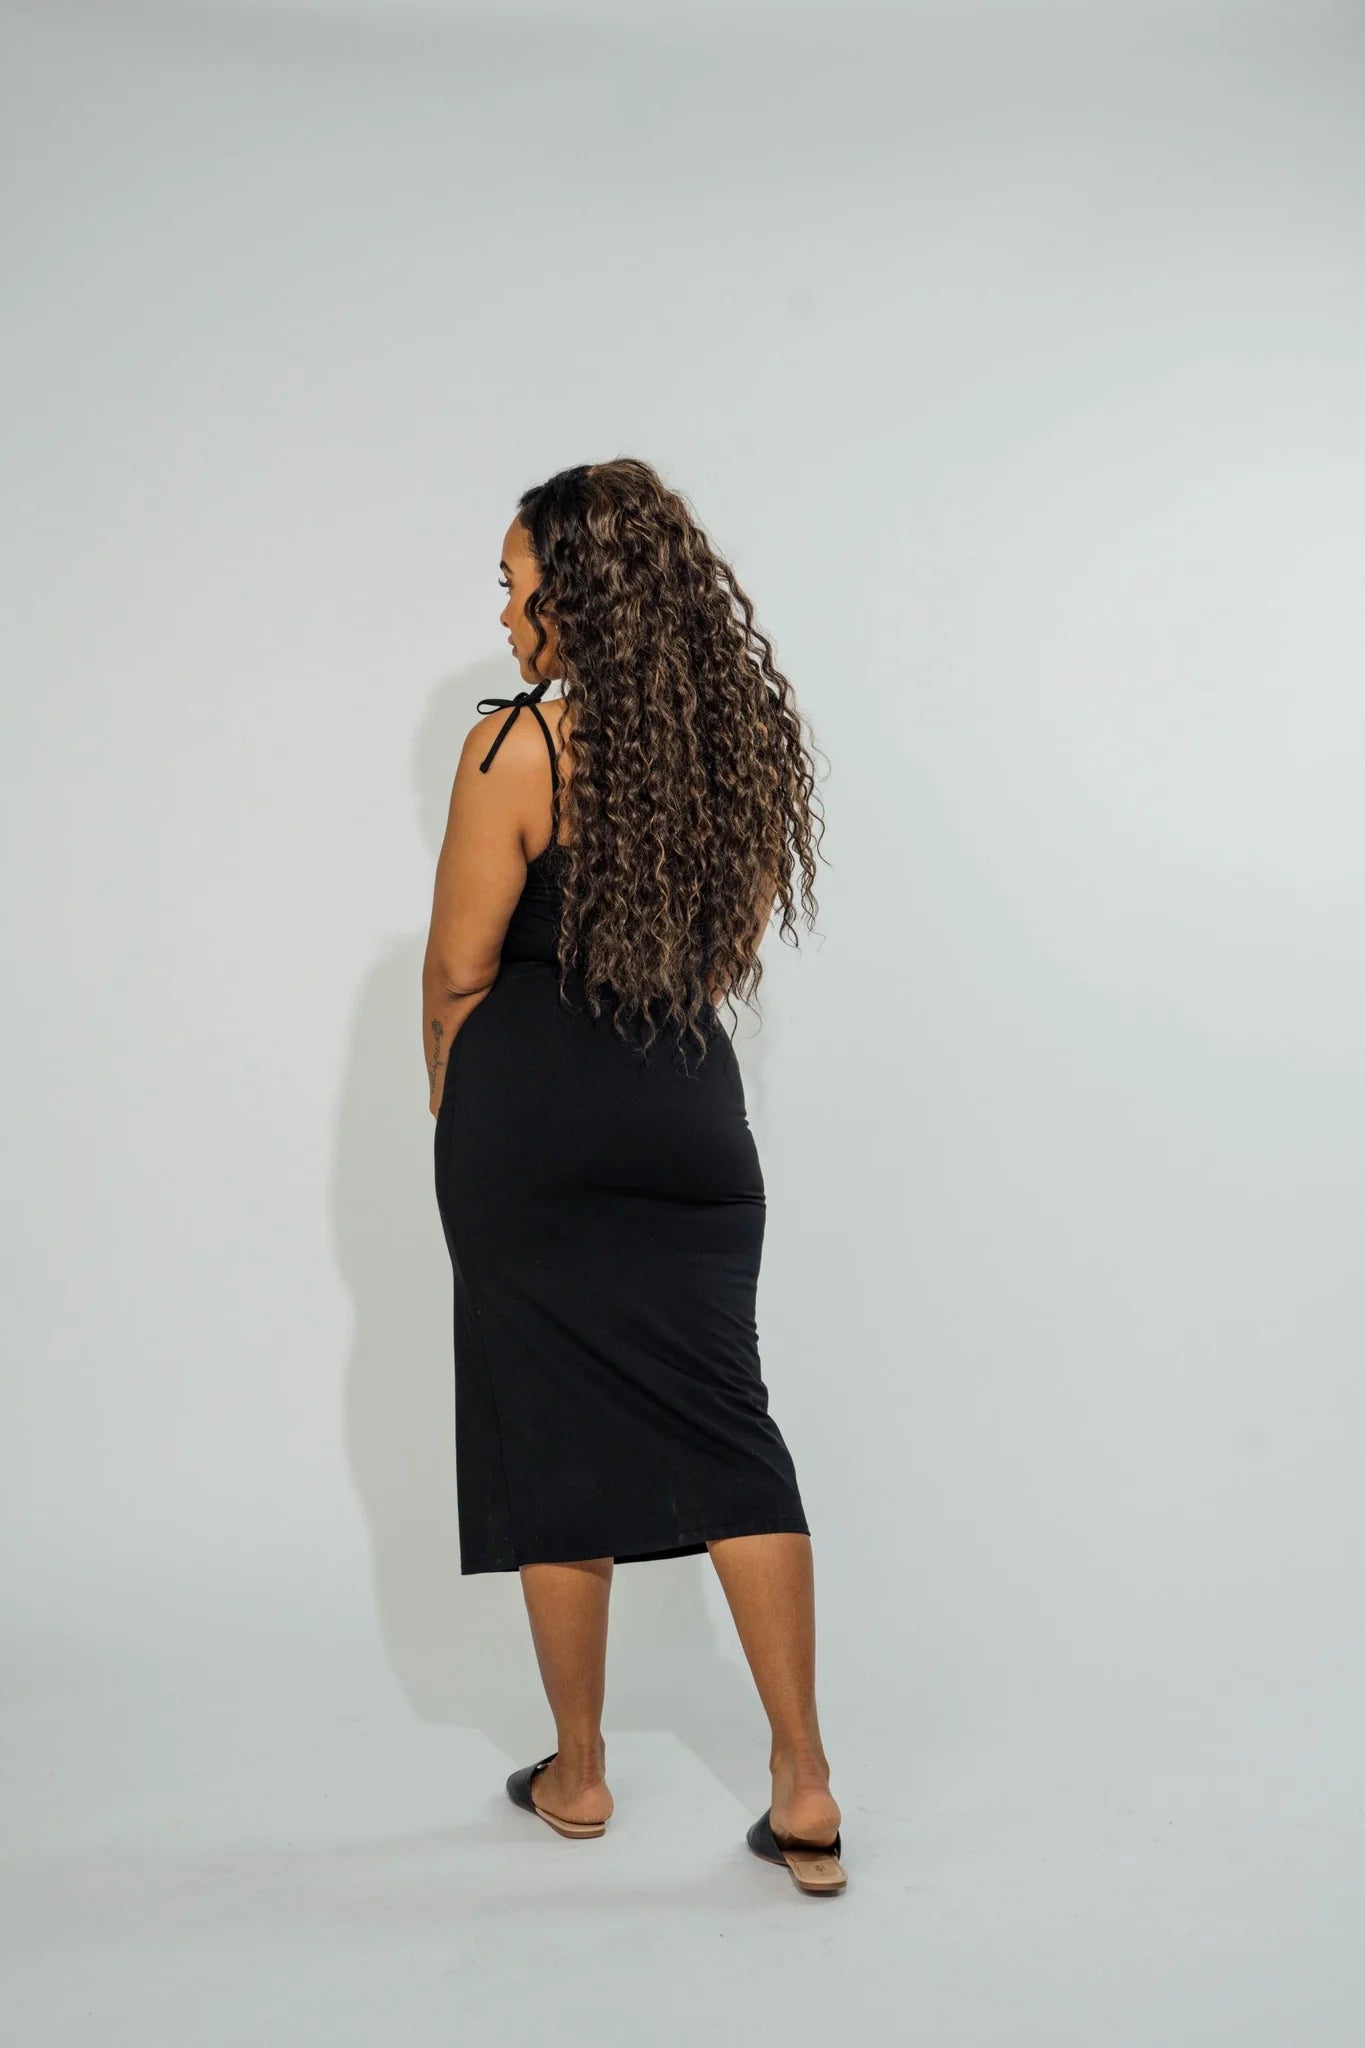 Wildflo Studio The Strappy Midi Dress in Jet at Style Society Marketplace back of dress for all body shapes